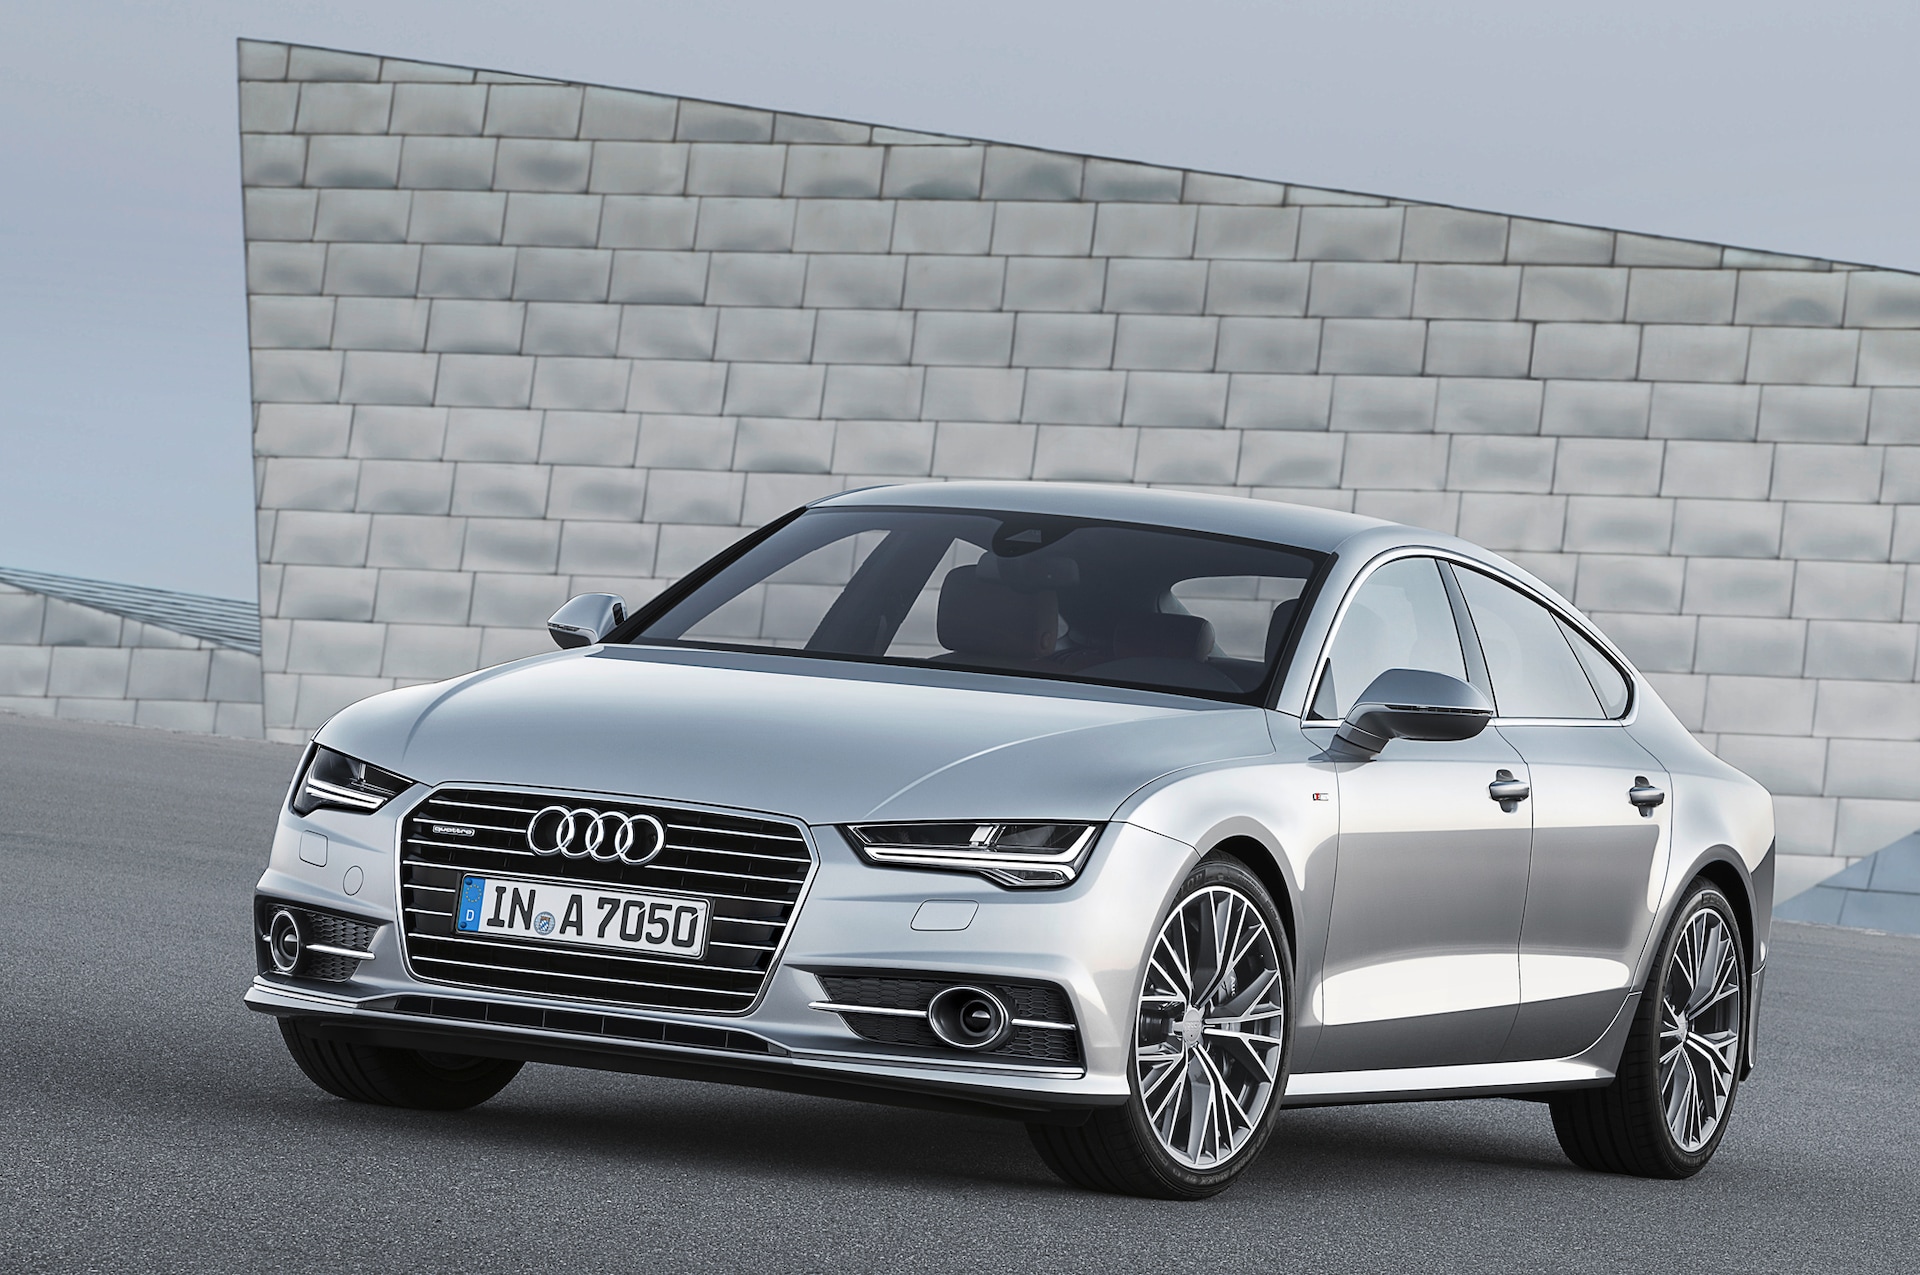 Updated 2015 Audi A7 Coming to U.S. Next Year